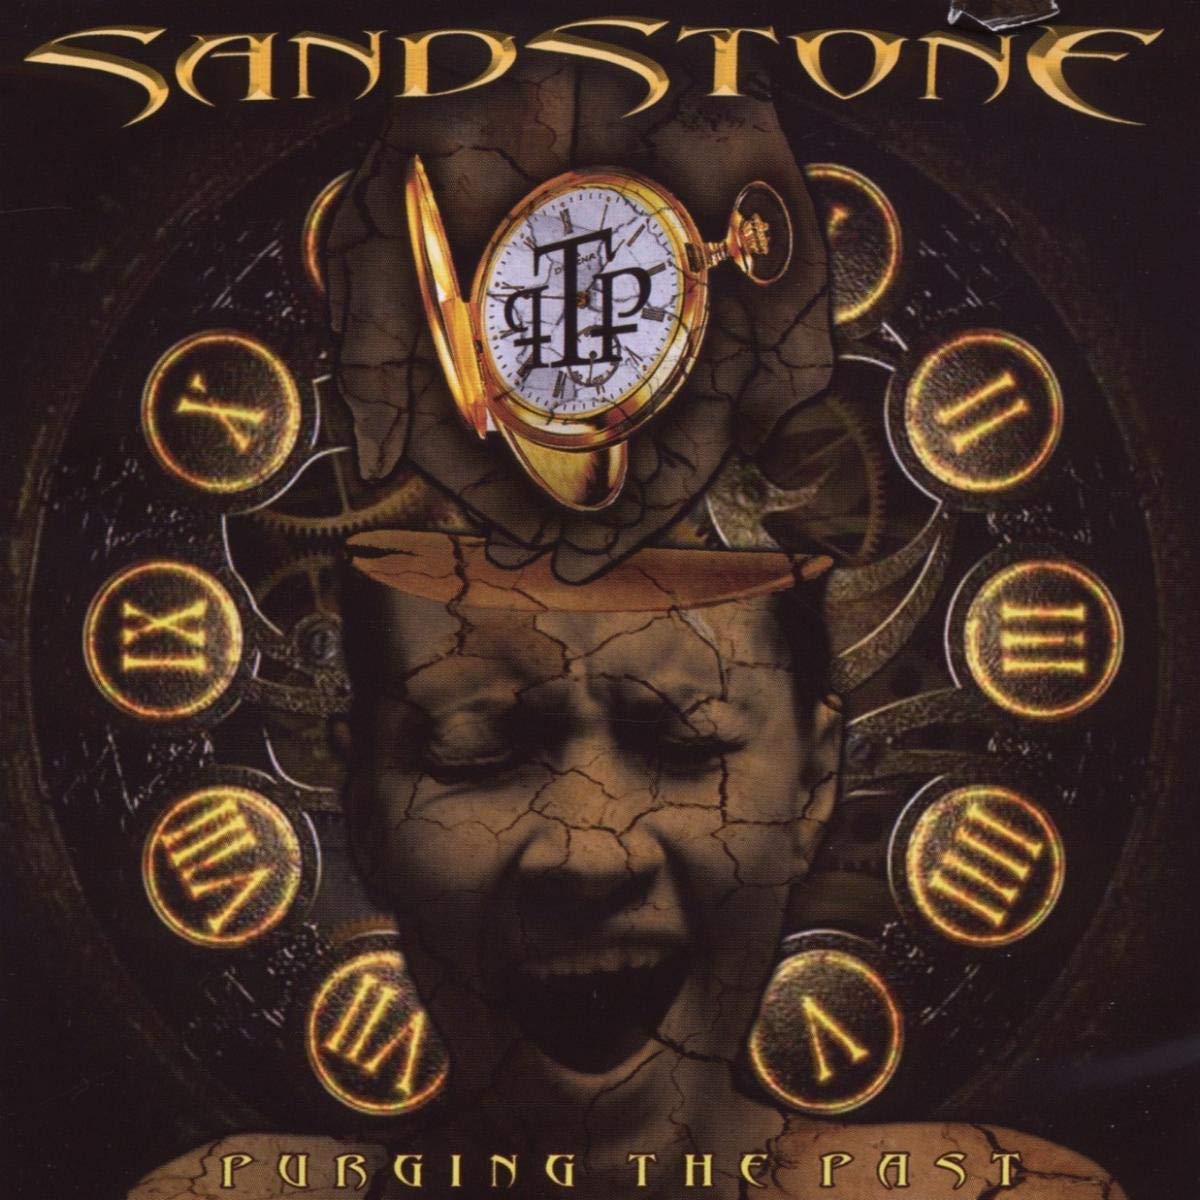 Sandstone- Purging The Past